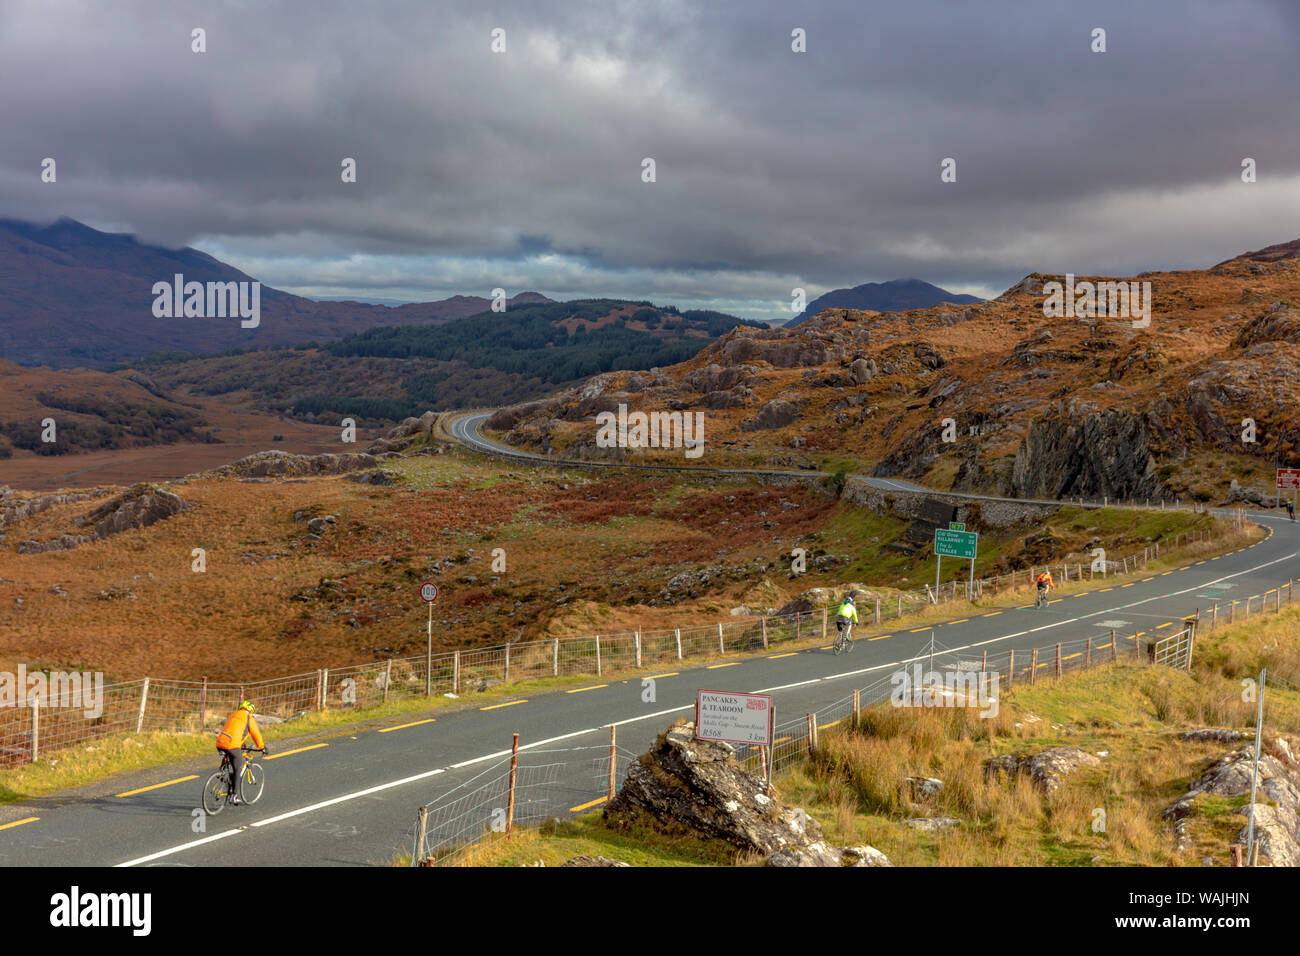 Road bicycling at Molls Gap in Killarney National Park, Ireland (Editorial Use Only) Stock Photo